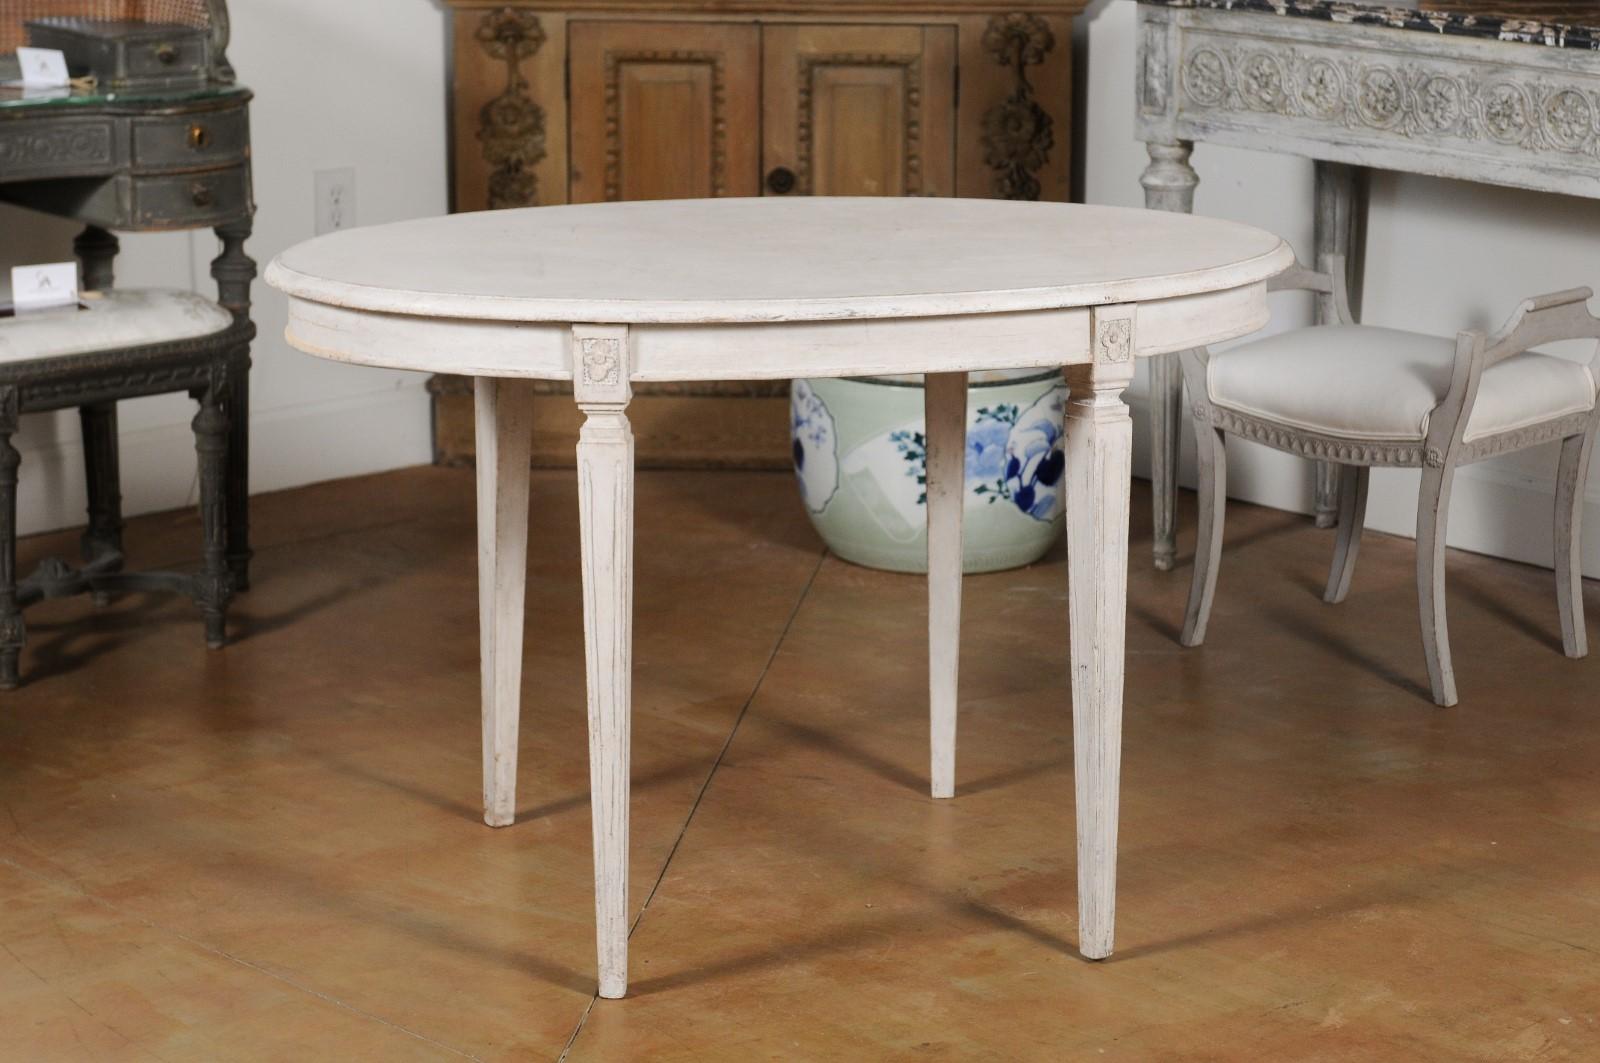 A Swedish Gustavian style painted table from the late 19th century, with oval top and tapered legs. Born in Sweden during the last quarter of the 19th century, this painted Gustavian table features an oval top with beveled edges, sitting above four